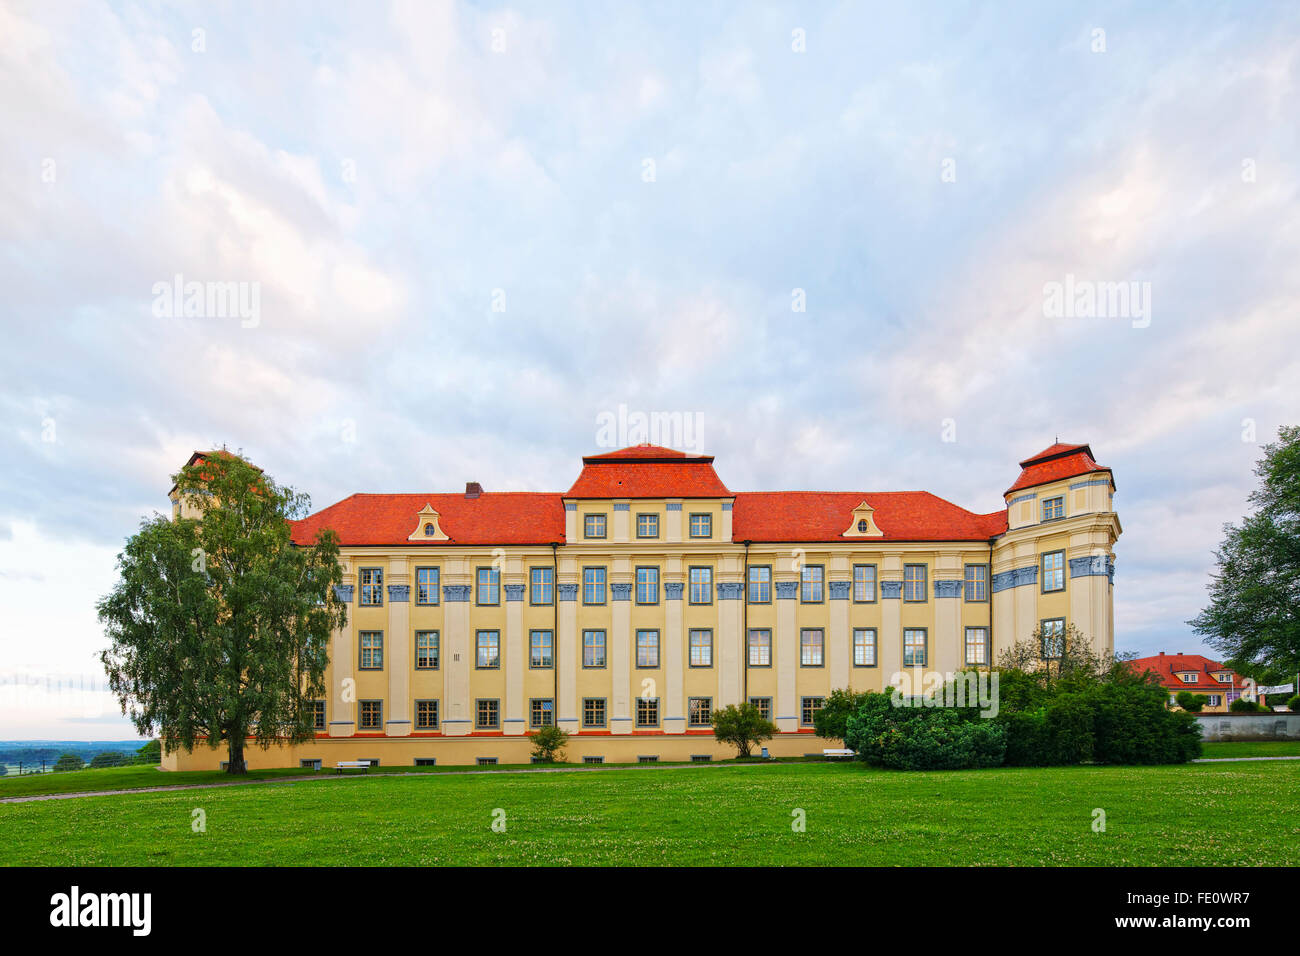 New palace, Tettnang, Upper Swabia, Bodensee Region, Baden-Württemberg, Germany Stock Photo